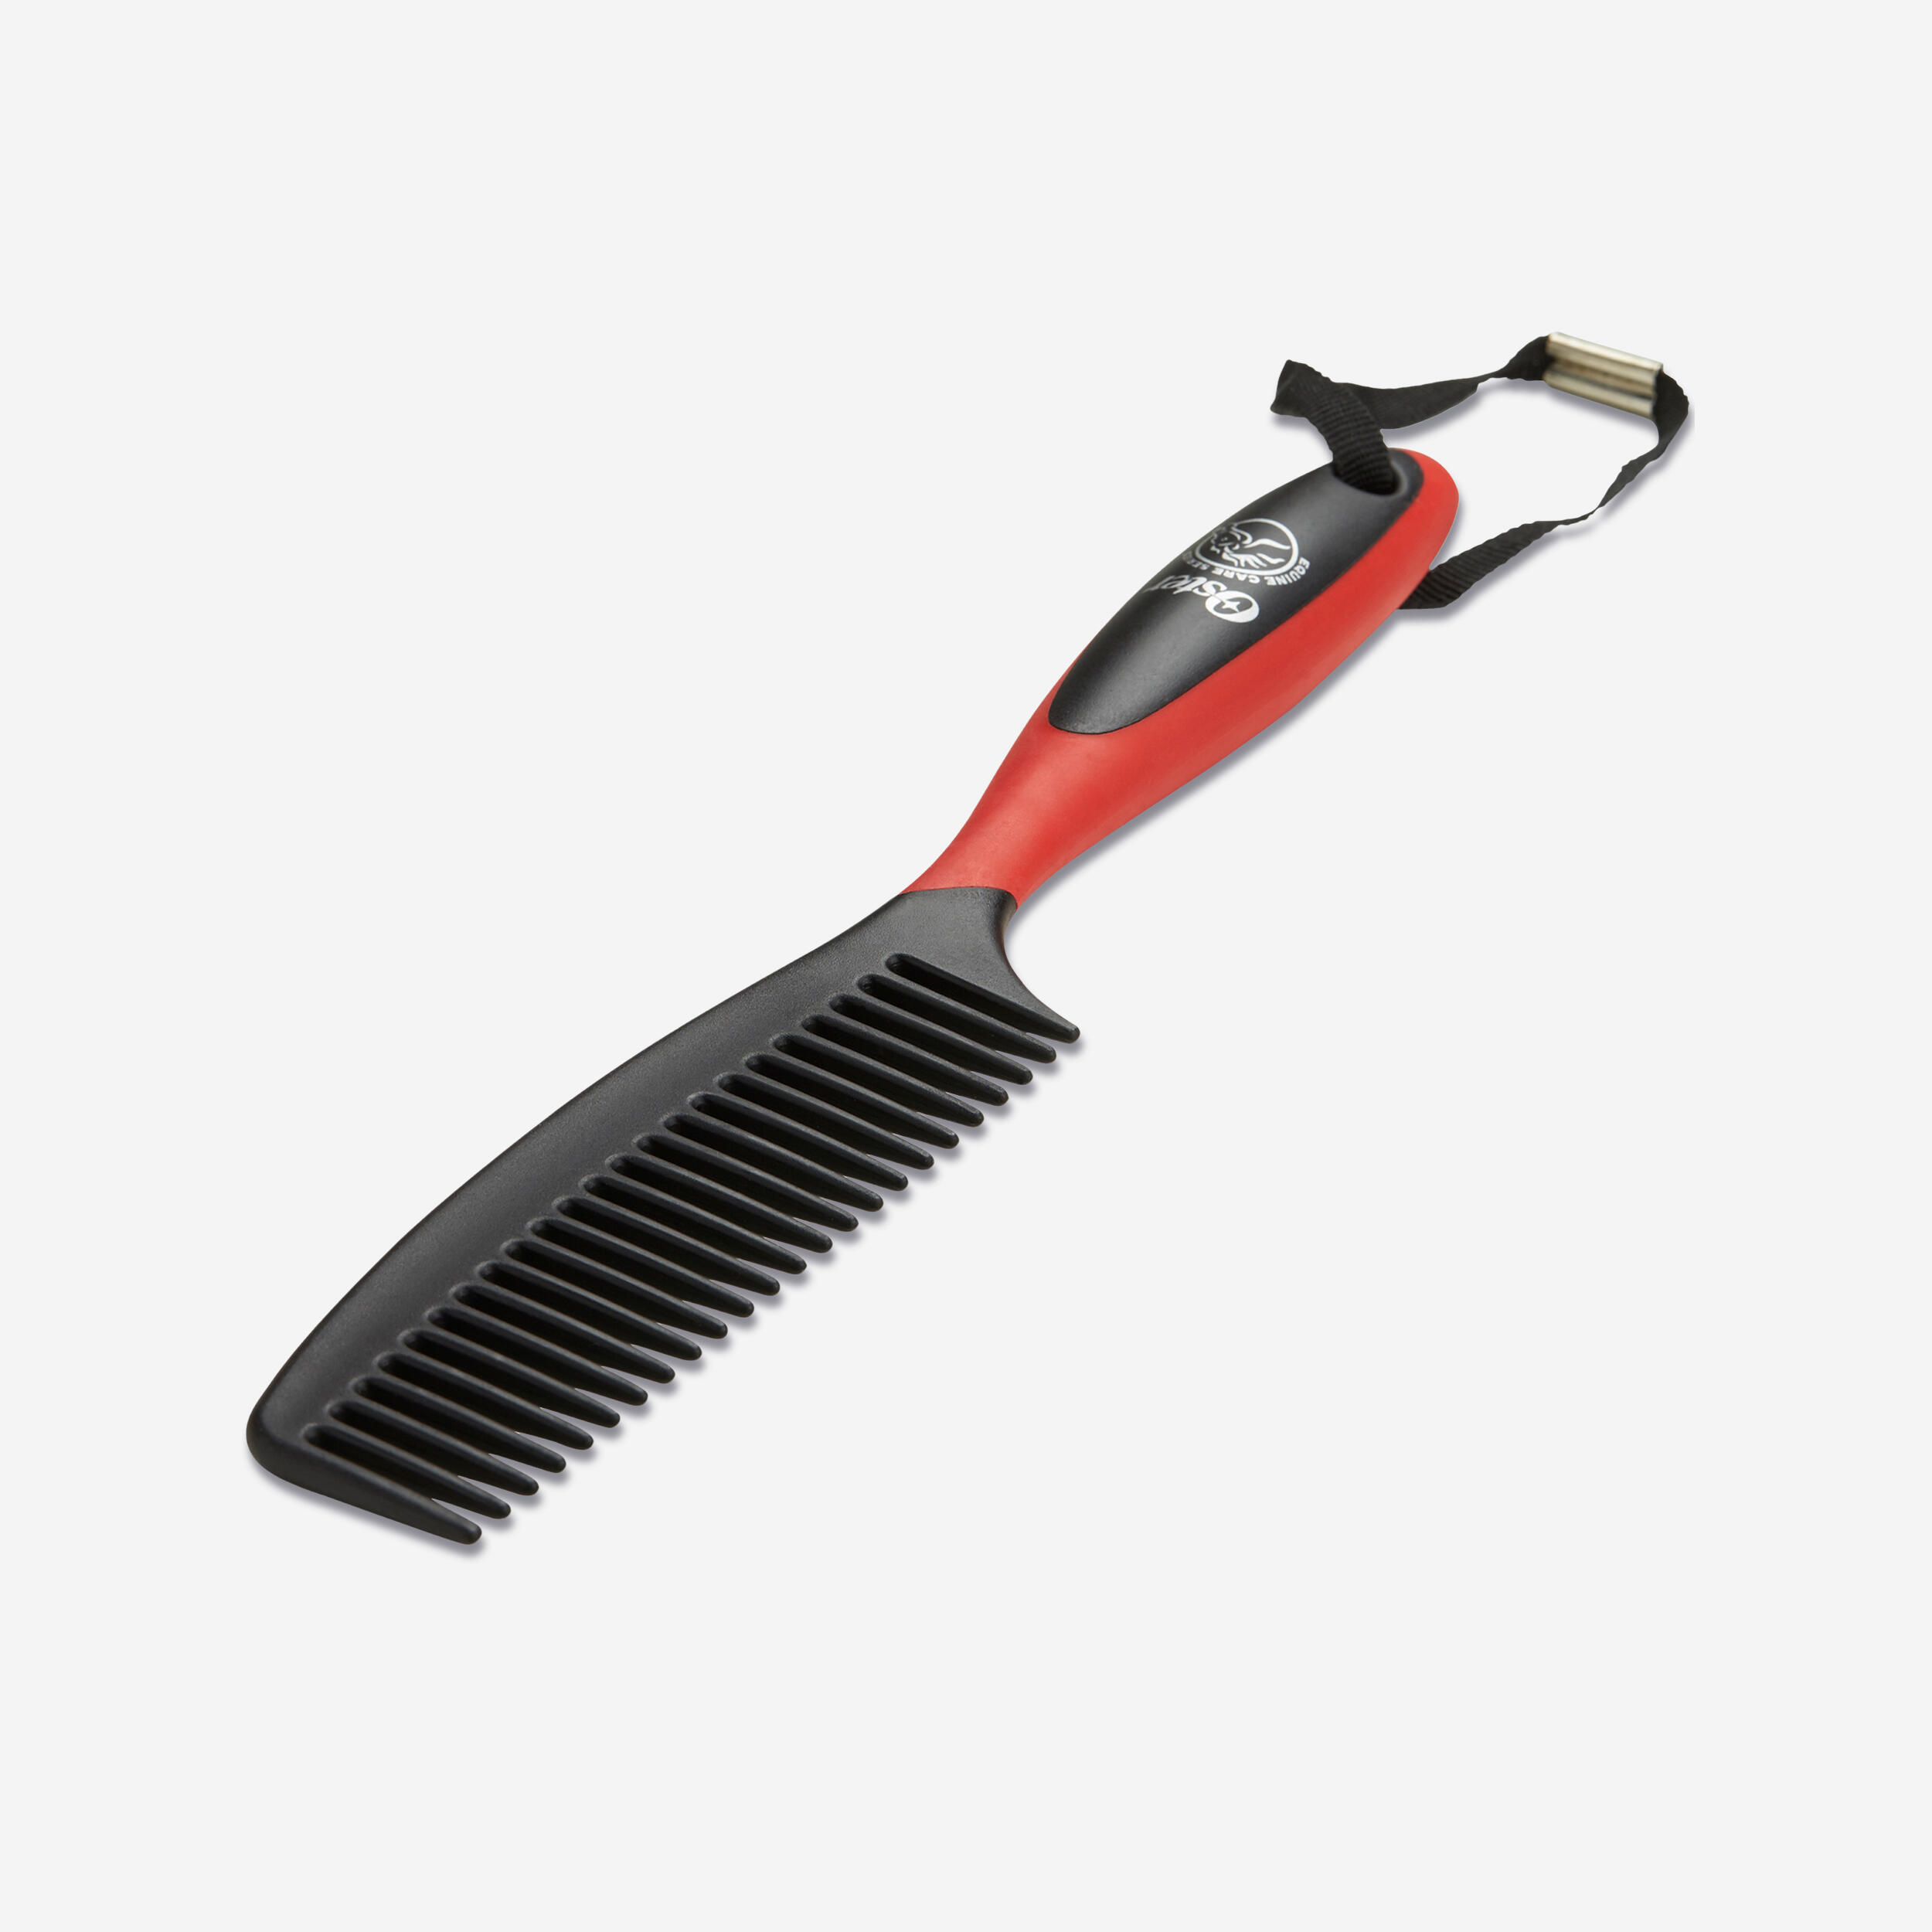 BROSSERIE OSTER Horse Riding Mane & Tail Comb - Red